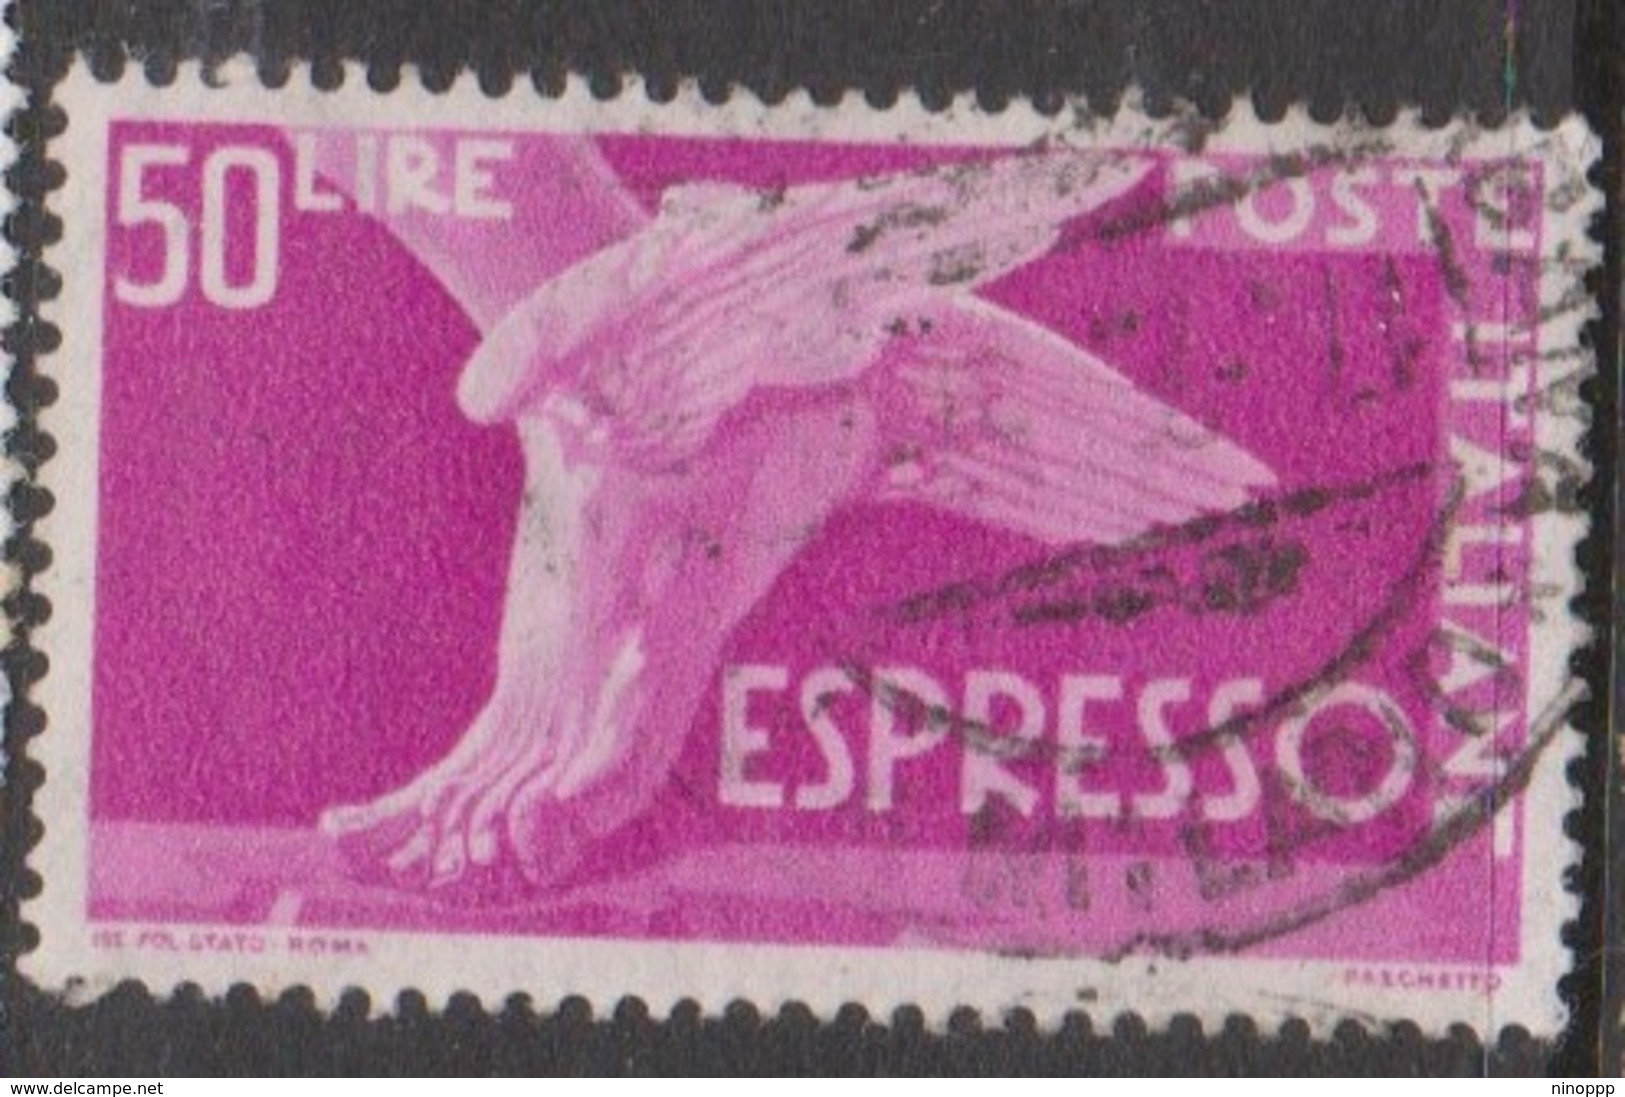 Italy E 33 1955  Special Delivery Stamp,5 Lire Pinkrose,mint Hinged - Express/pneumatic Mail